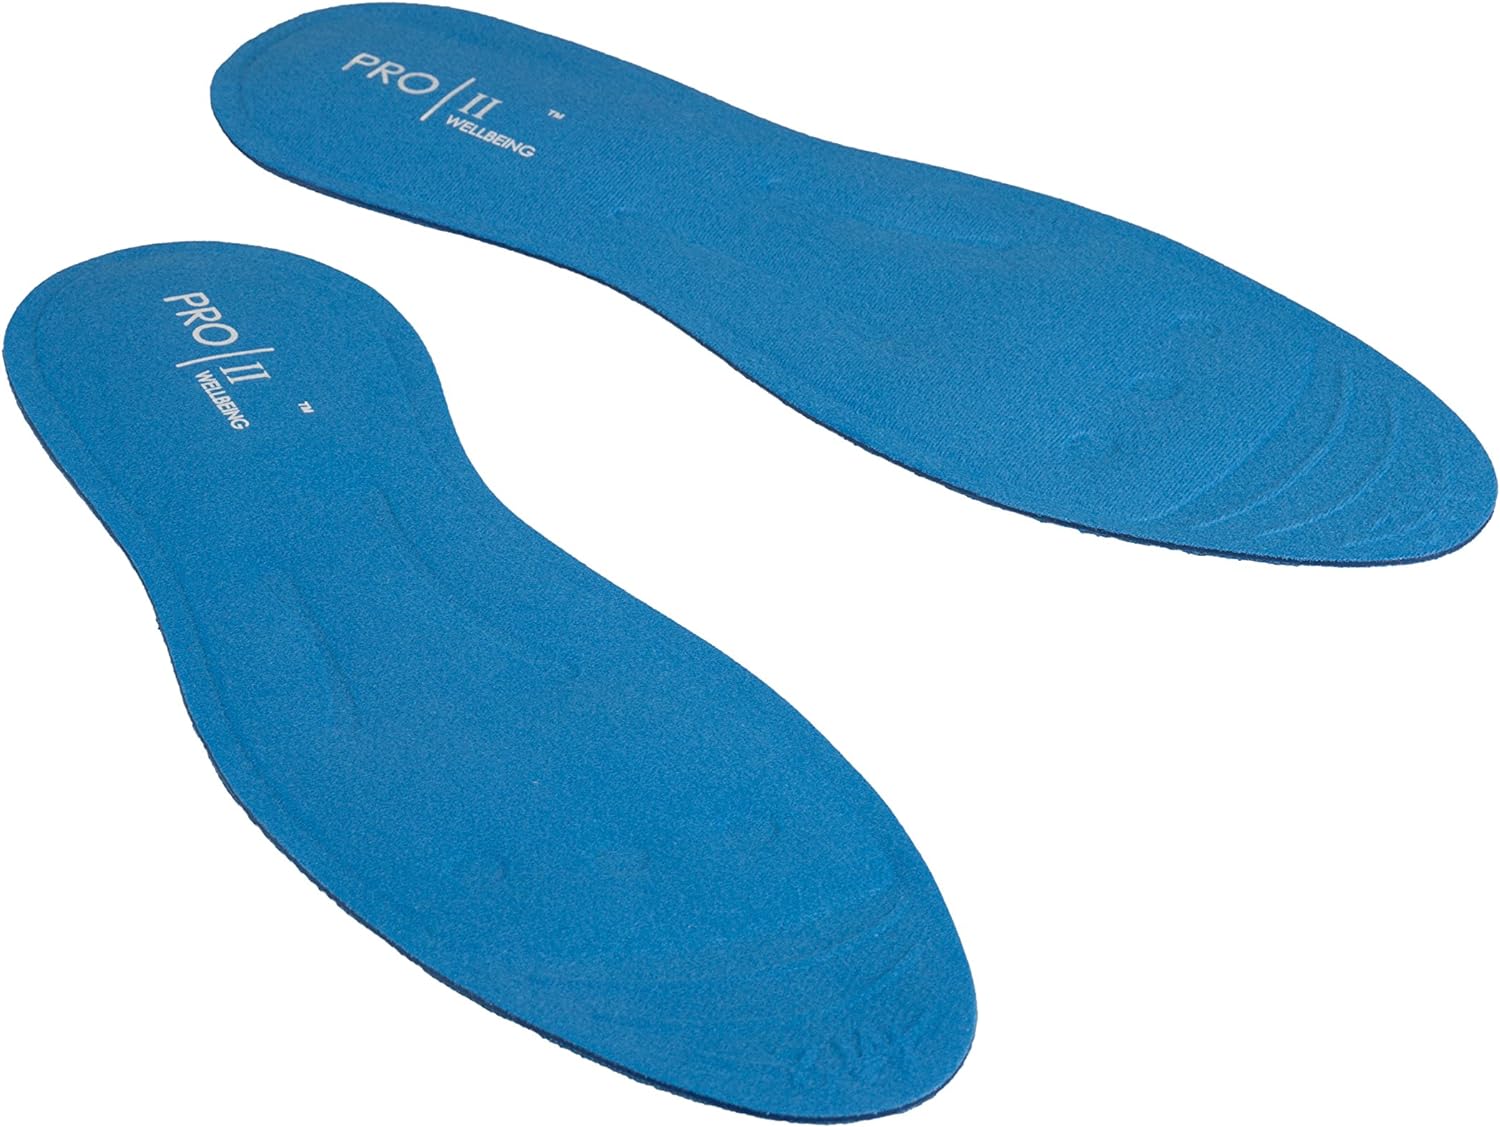 PRO 11 WELLBEING Revolutionary Gel Massaging Insoles for Performance Sports Fantastic Shock Absorption Insoles